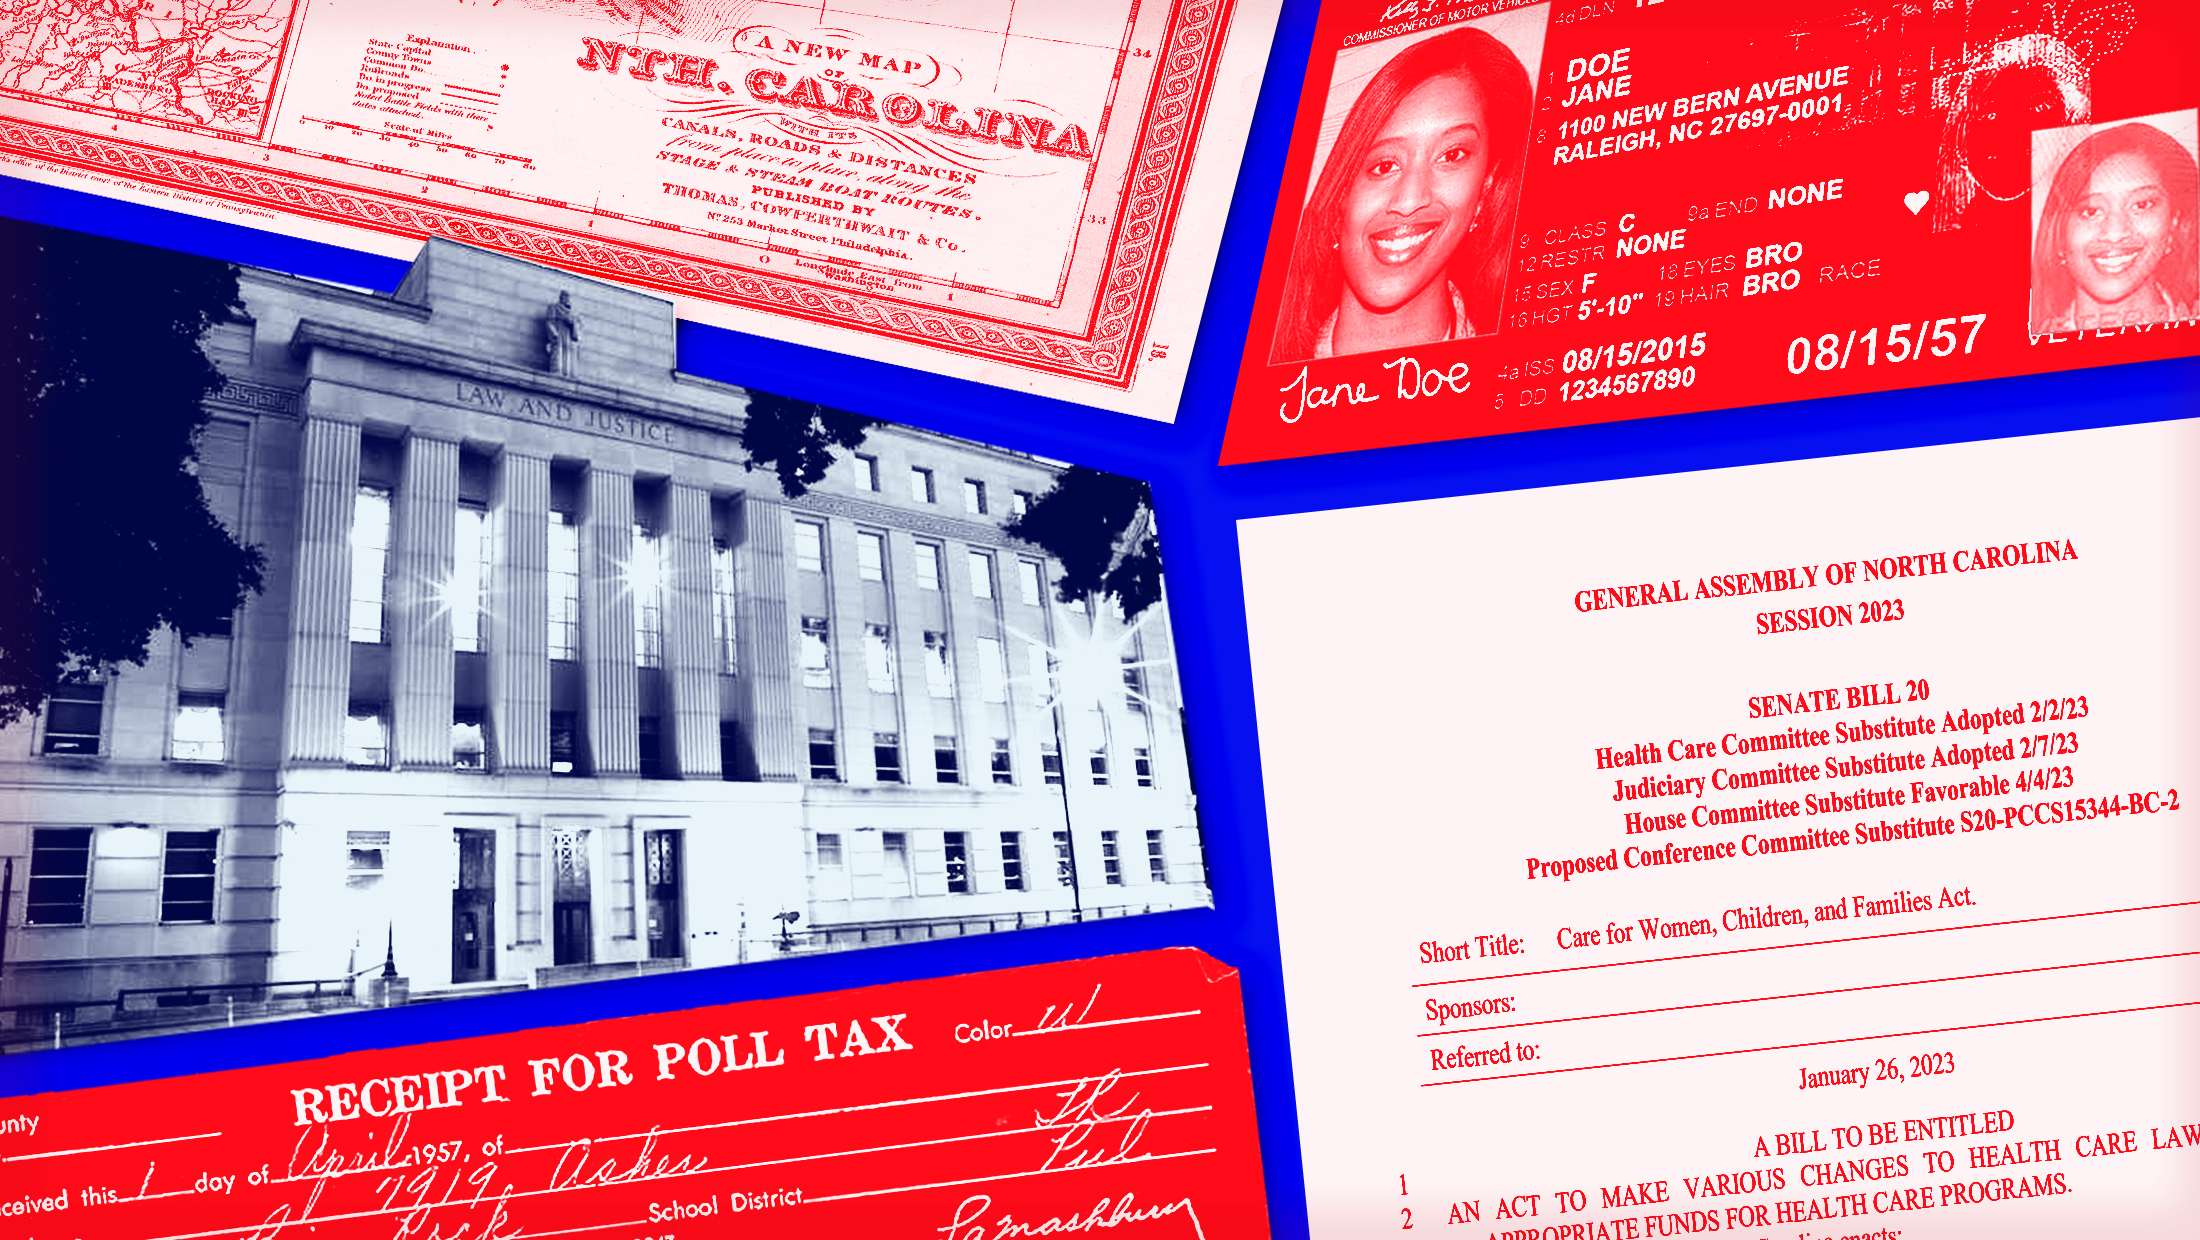 Blue background with red-toned images of a North Carolina driver's license, a receipt for a poll tax, NC Senate Bill 20 and a North Carolina map and dark blue toned image of the NC Supreme Court.